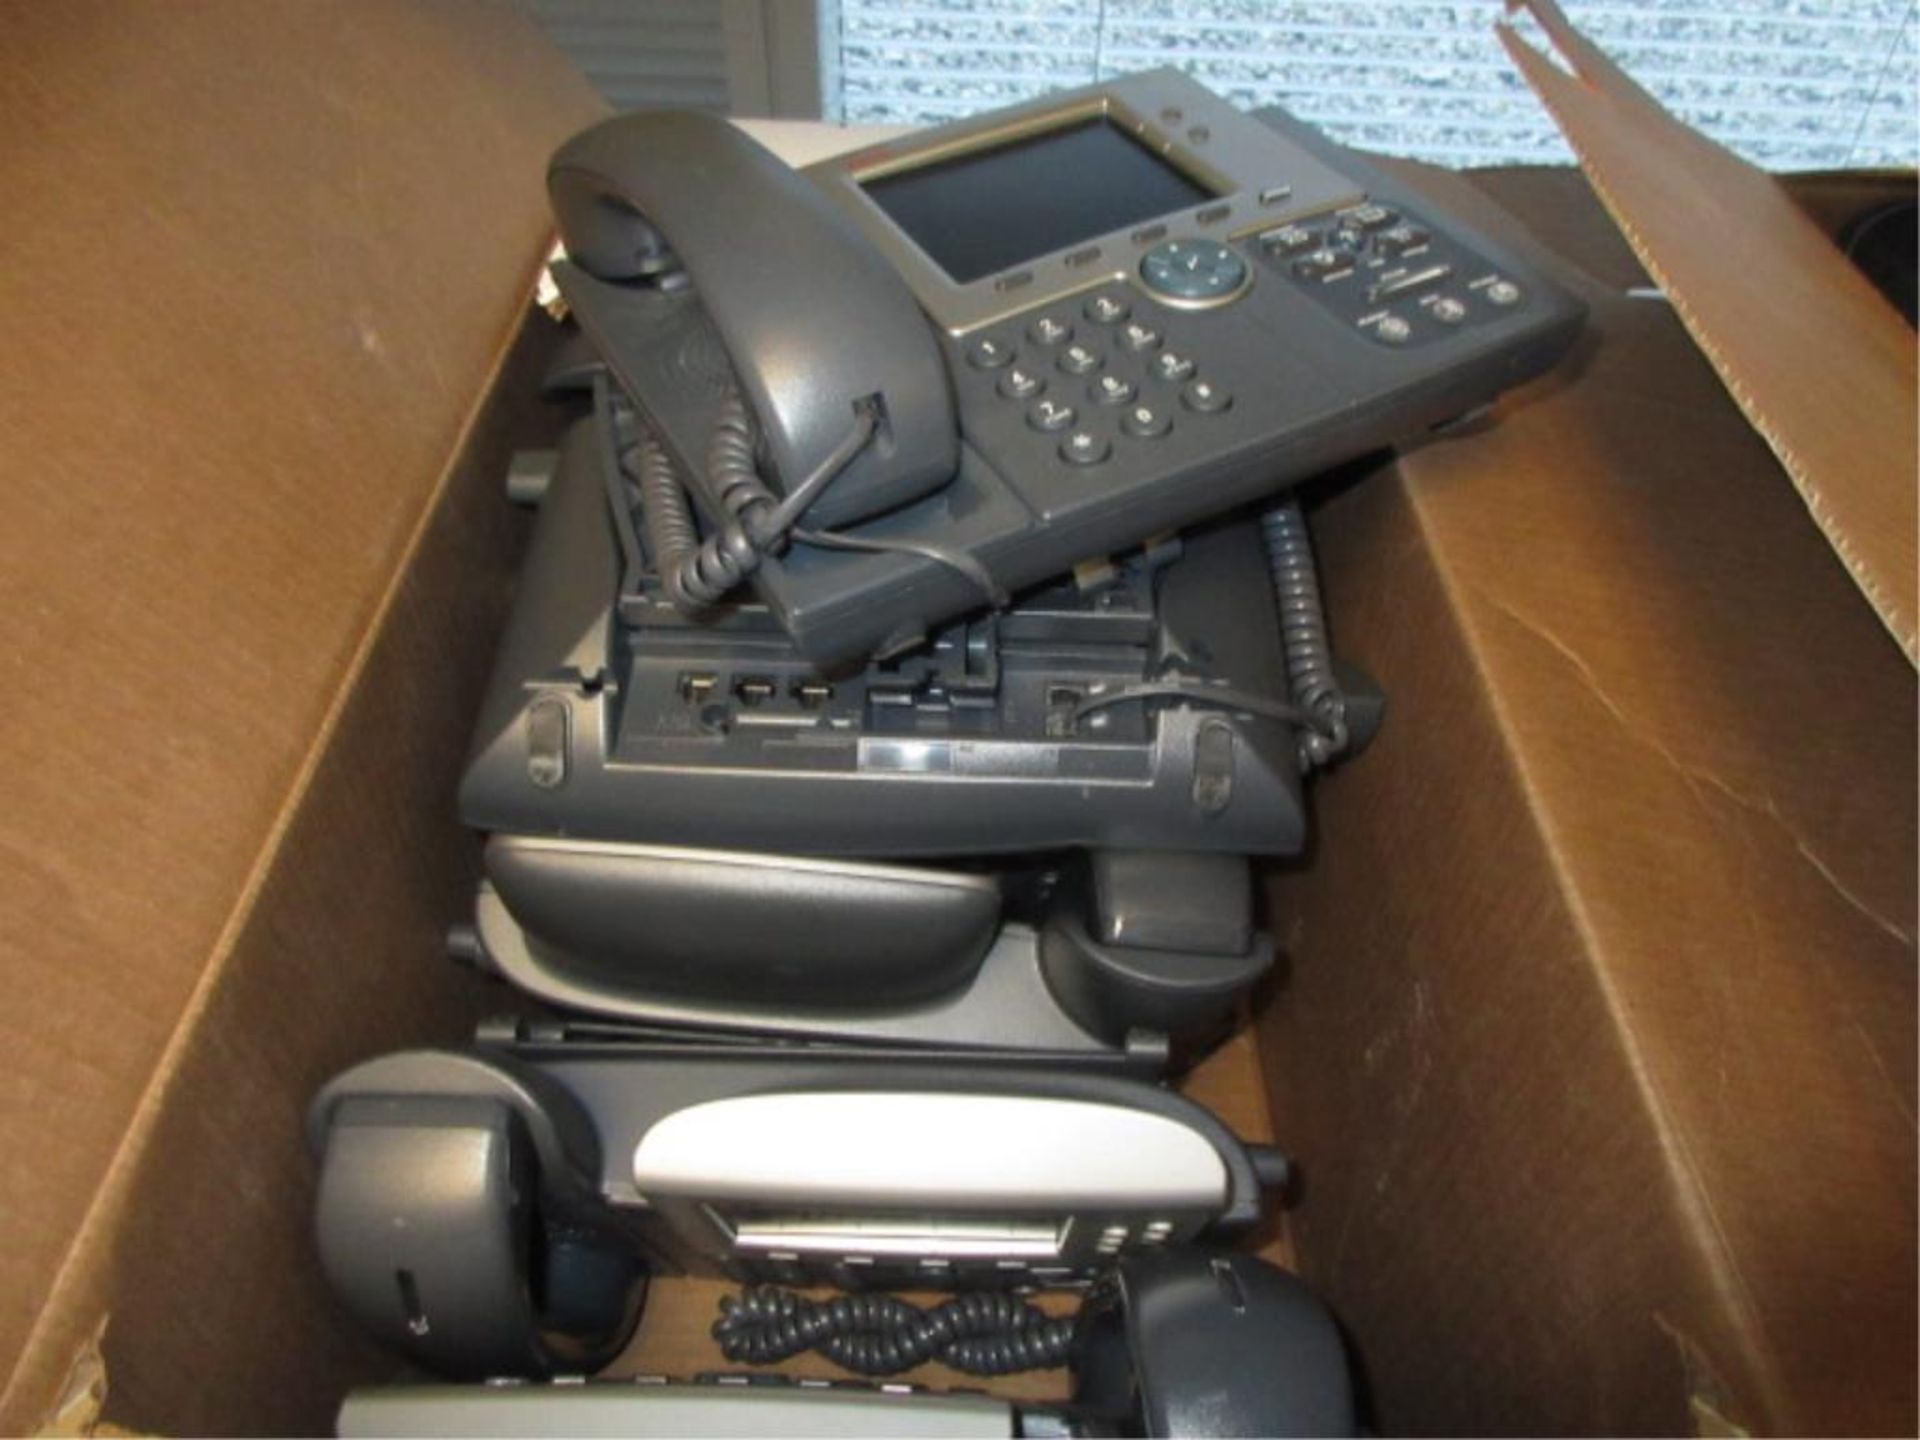 Cisco 7945 Lot of (10) IP Phone Sets, in one box. HIT# 2178982. Loc: W3.148. Asset Located at 1415